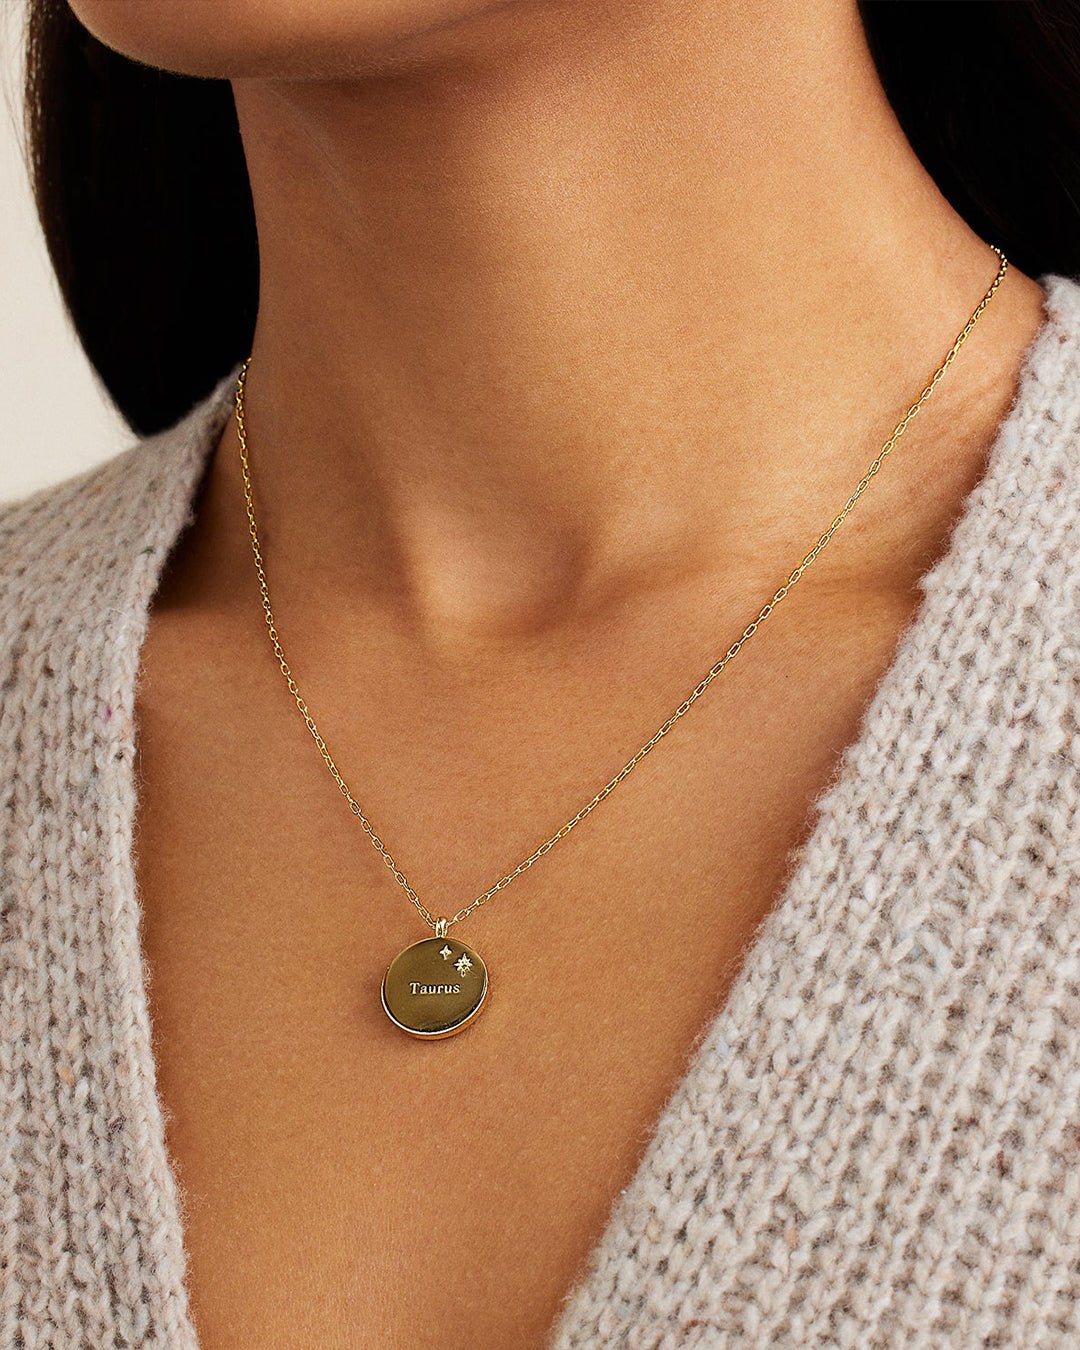 Zodiac Necklace - Taurus,  Astrology Coin Necklace,  Taurus Necklace   || option::Gold Plated, Taurus